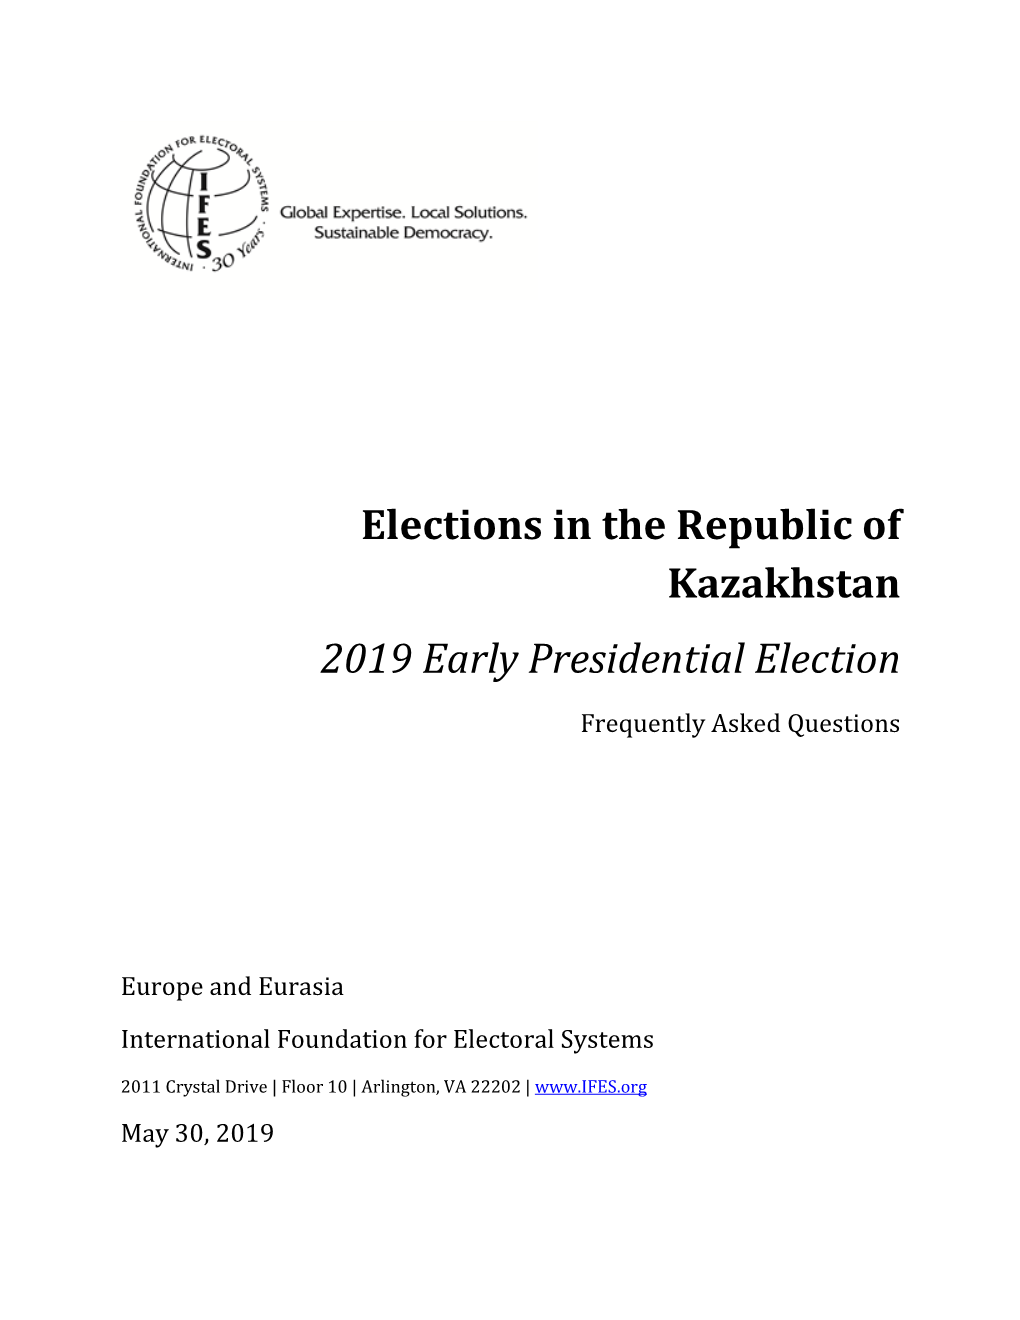 IFES, Faqs, 'Elections in Kazakhstan: 2019 Early Presidential Election